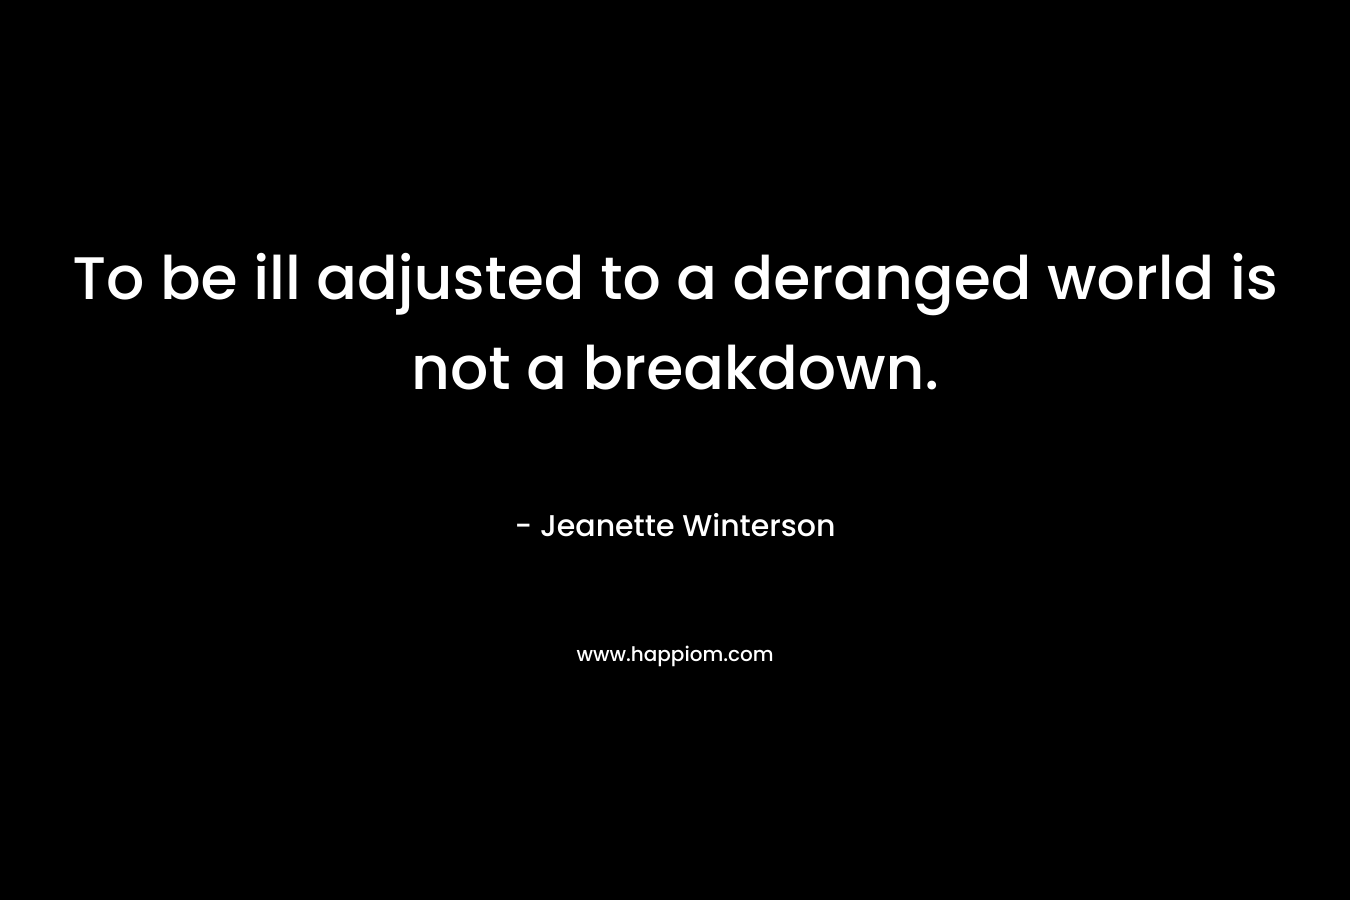 To be ill adjusted to a deranged world is not a breakdown. – Jeanette Winterson